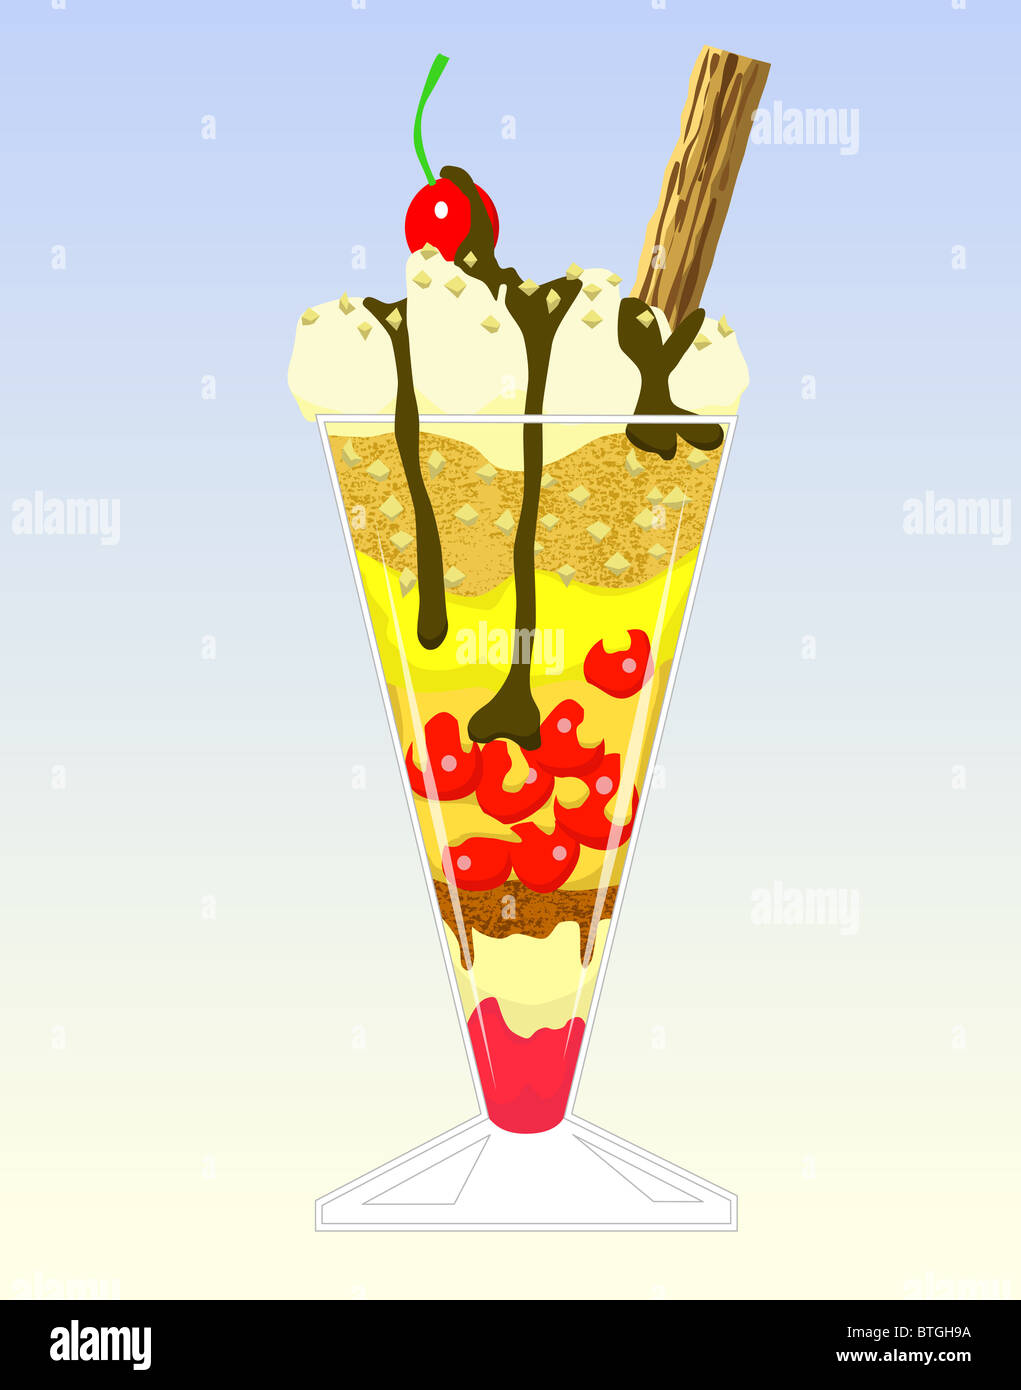 Illustration of dessert in a tall glass Stock Photo